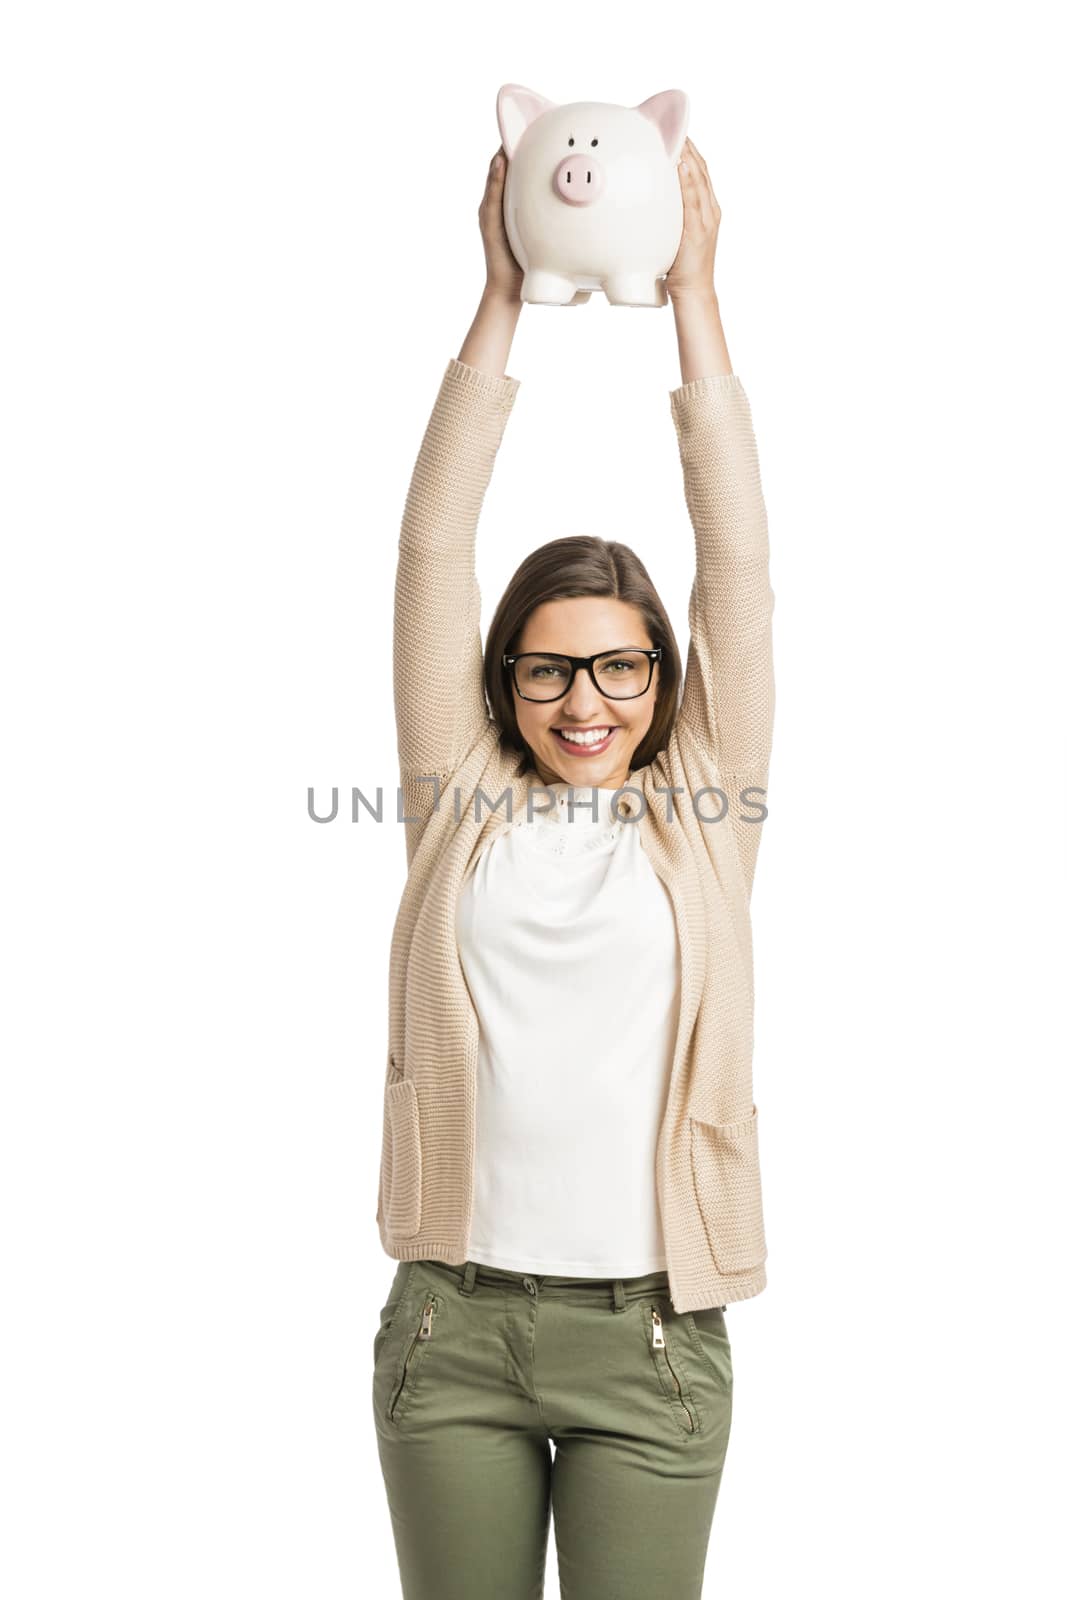 Beautiful and happy woman with arms high holding a piggy bank